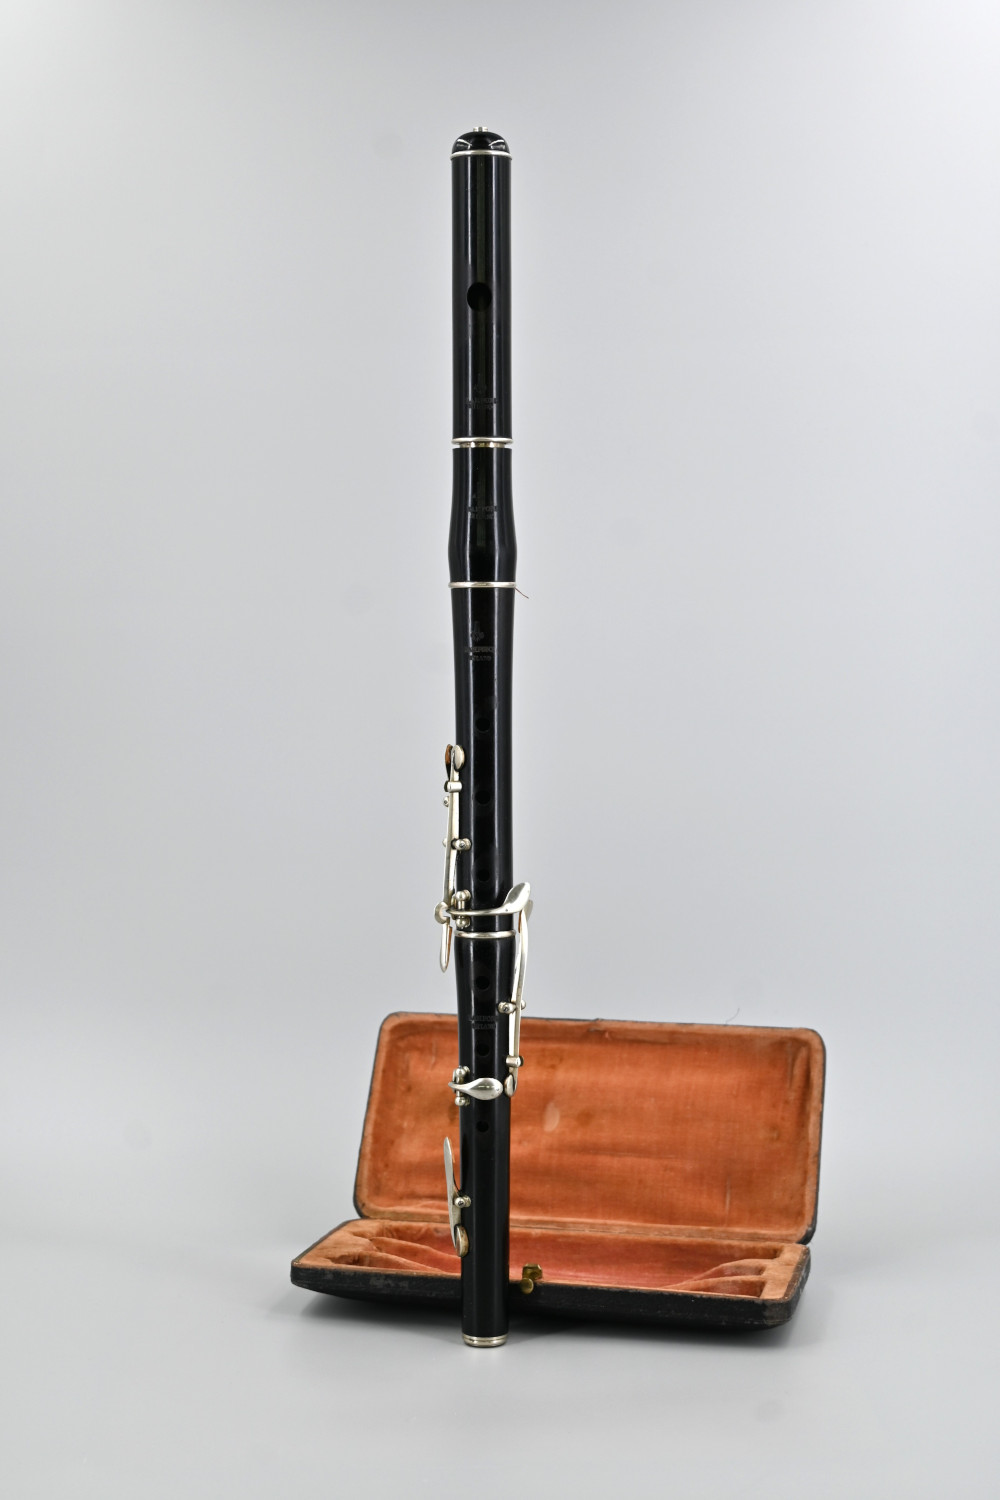 Third-flute-agostino-rampone-vm-collectables1